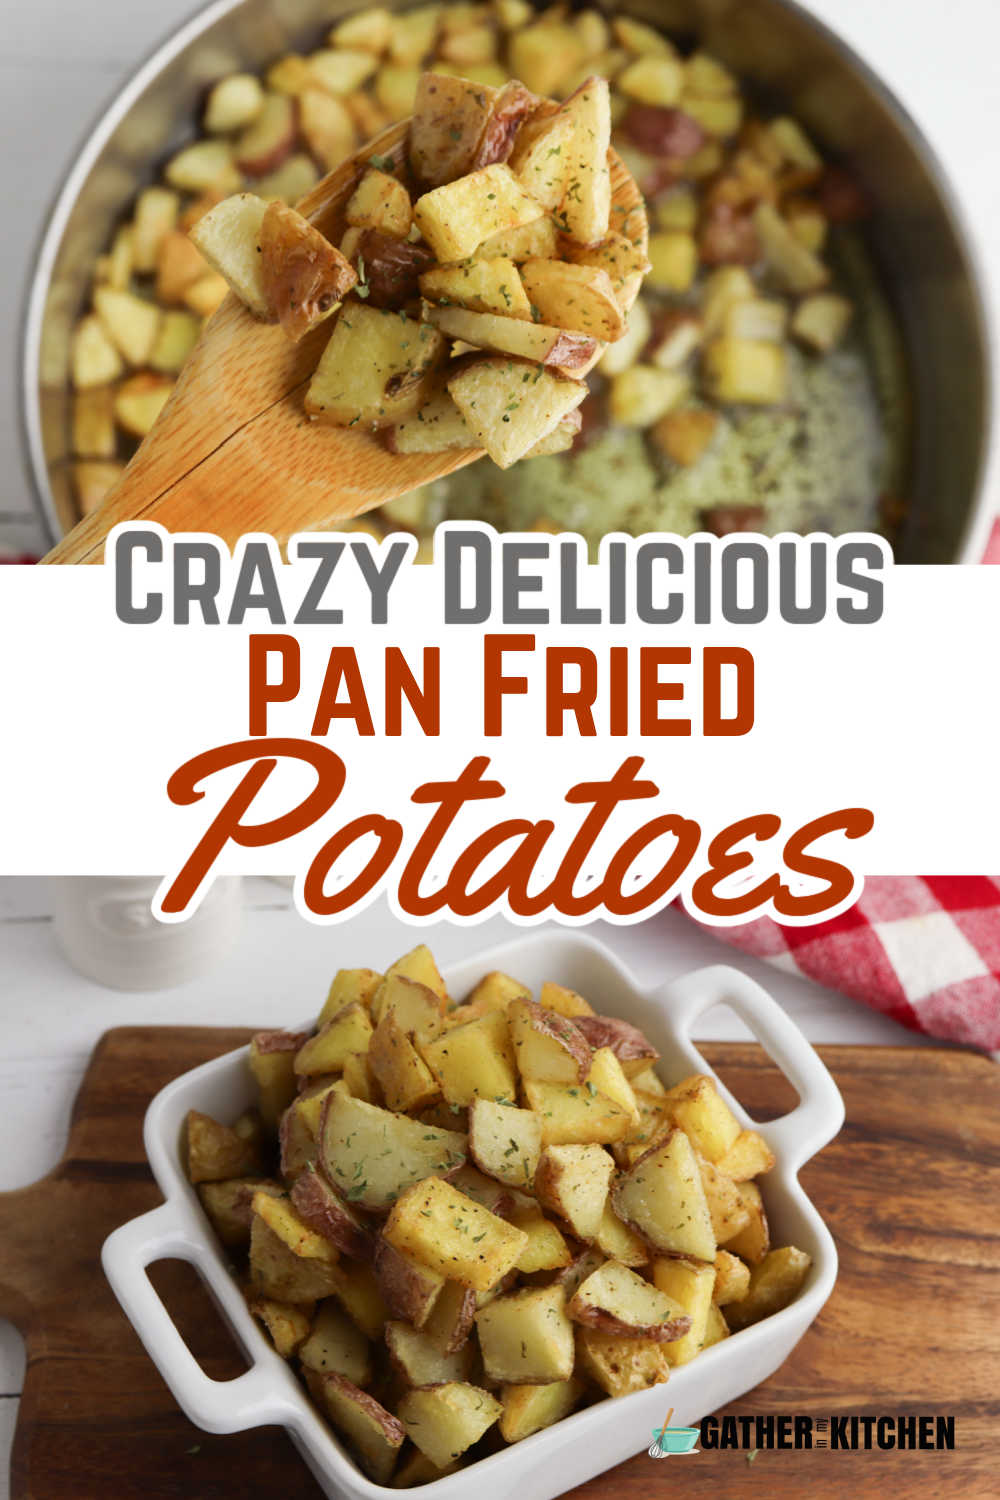 Pin image: top is a pan with a spoon holding up crispy fried potatoes, middle says "Crazy delicious pan fried potatoes" and bottom is a square dish with fried potatoes in it.